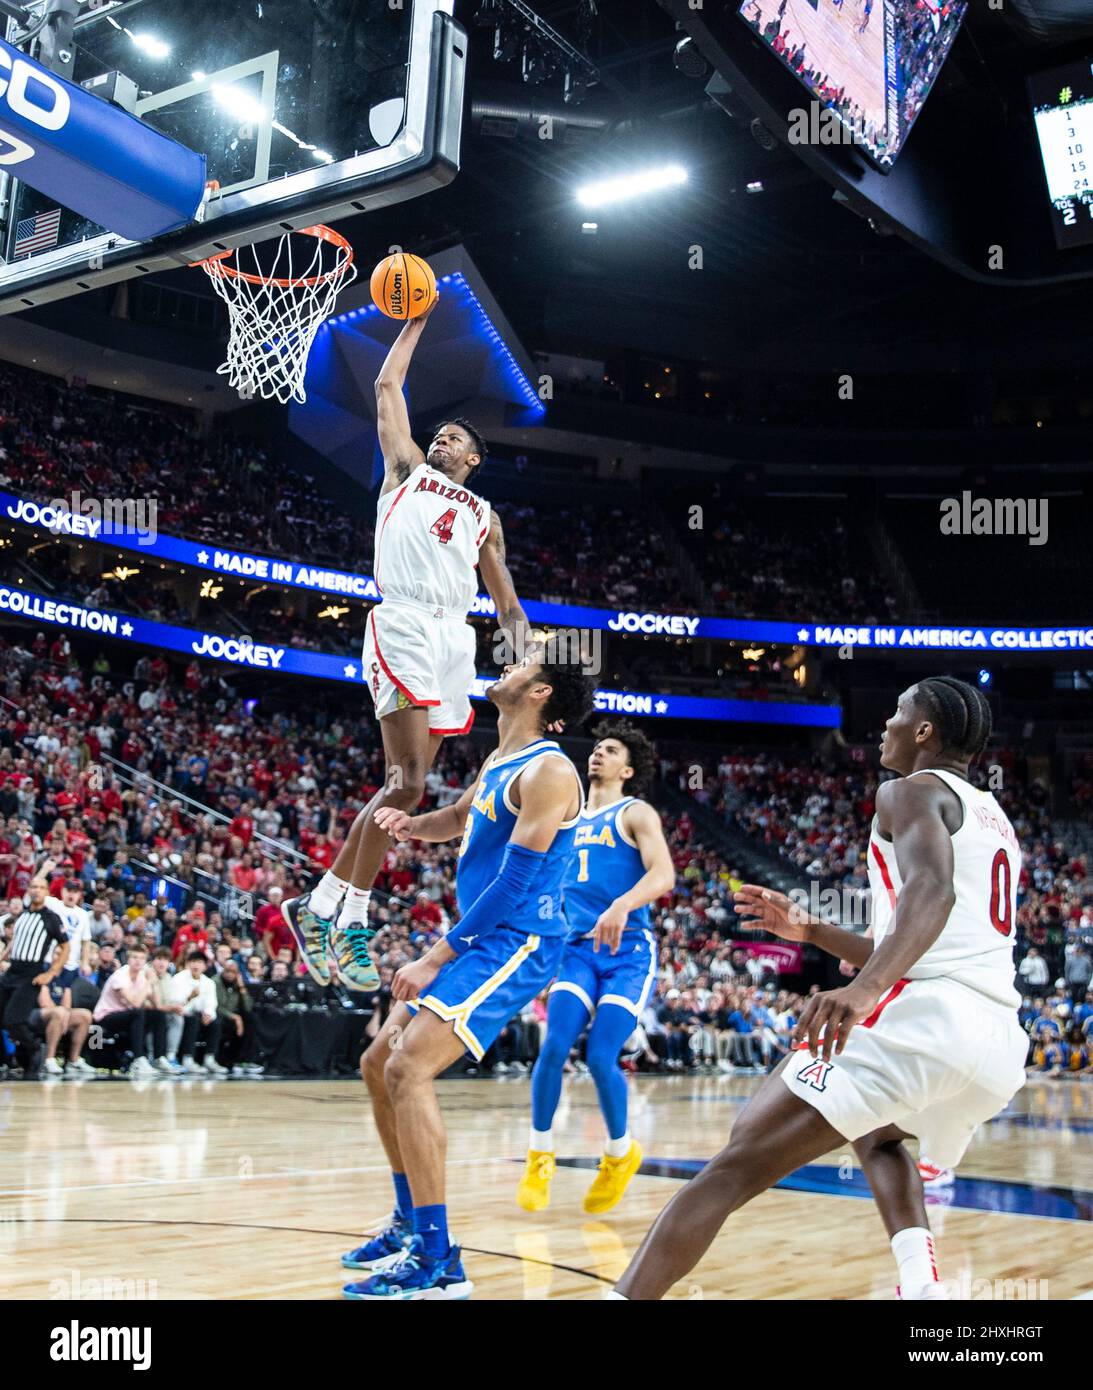 Las Vegas, NV, USA. 12th Mar, 2022. A. Arizona guard Dalen Terry (4) slam  dunks the ball during the NCAA Pac 12 Men's Basketball Tournament  Championship game between UCLA Bruins and the